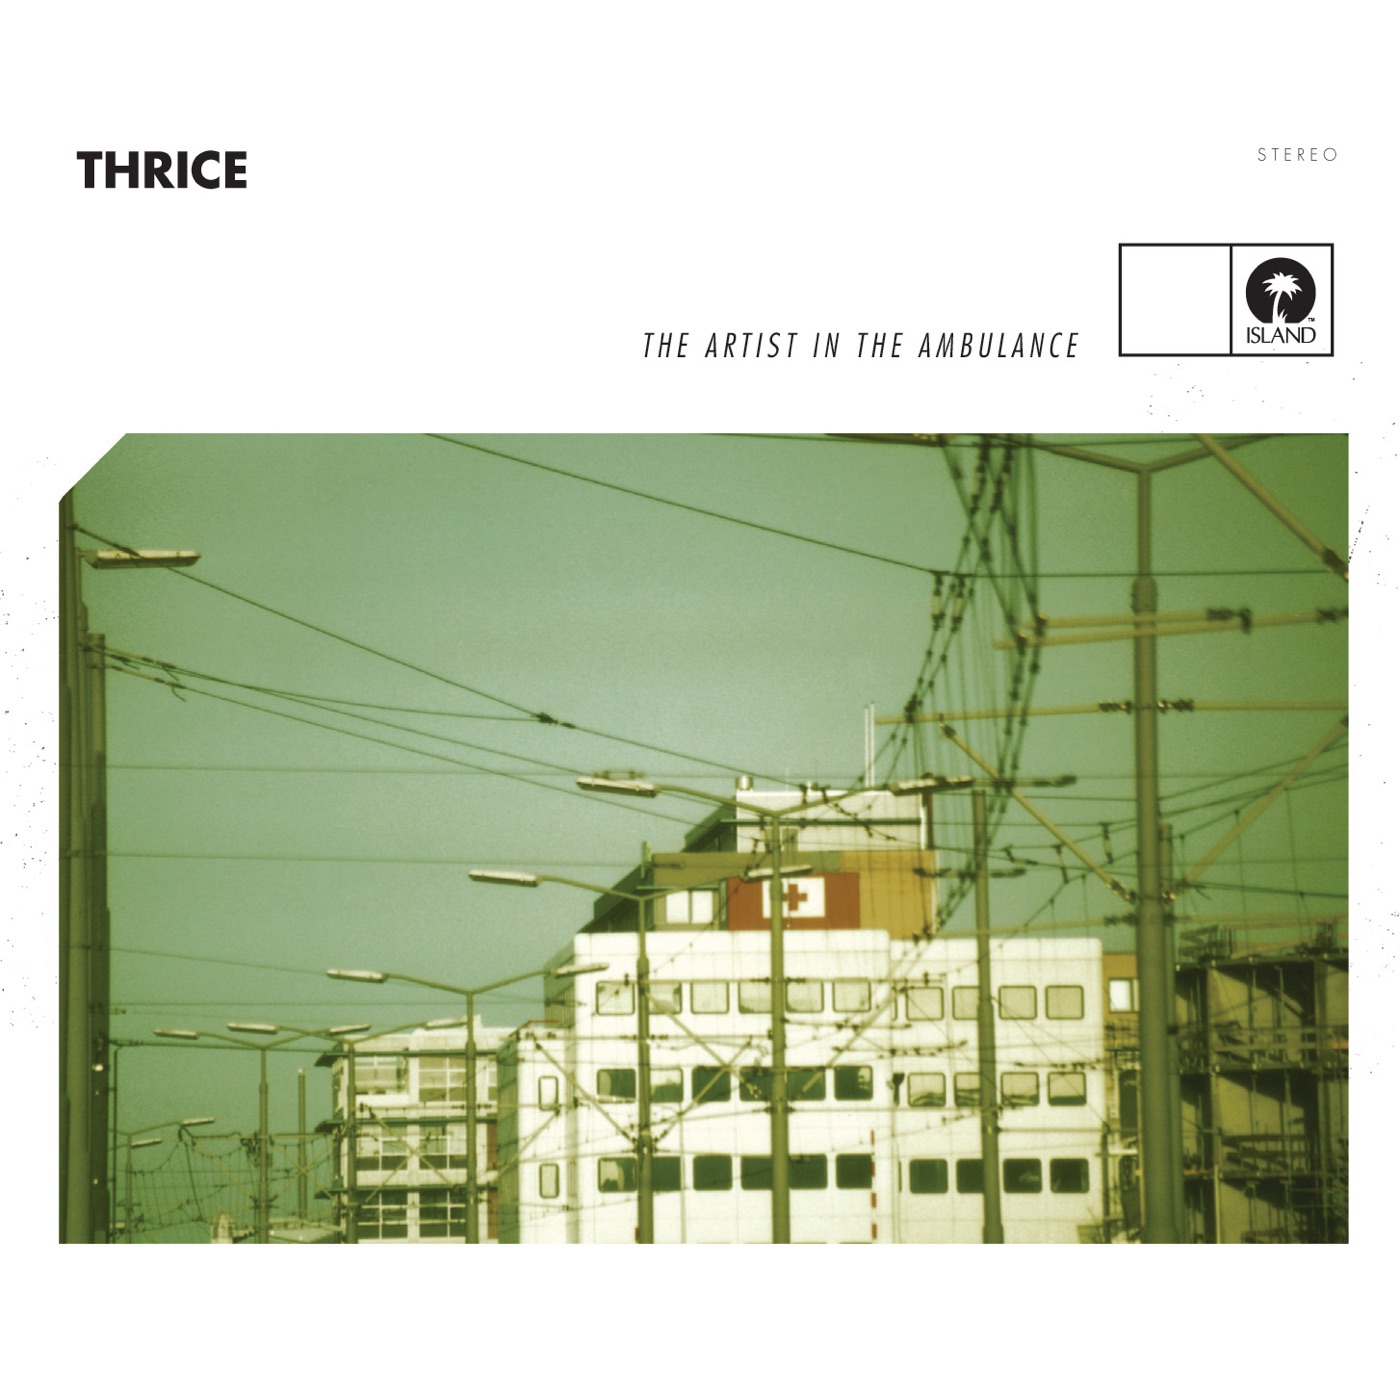 The Artist in the Ambulance by Thrice